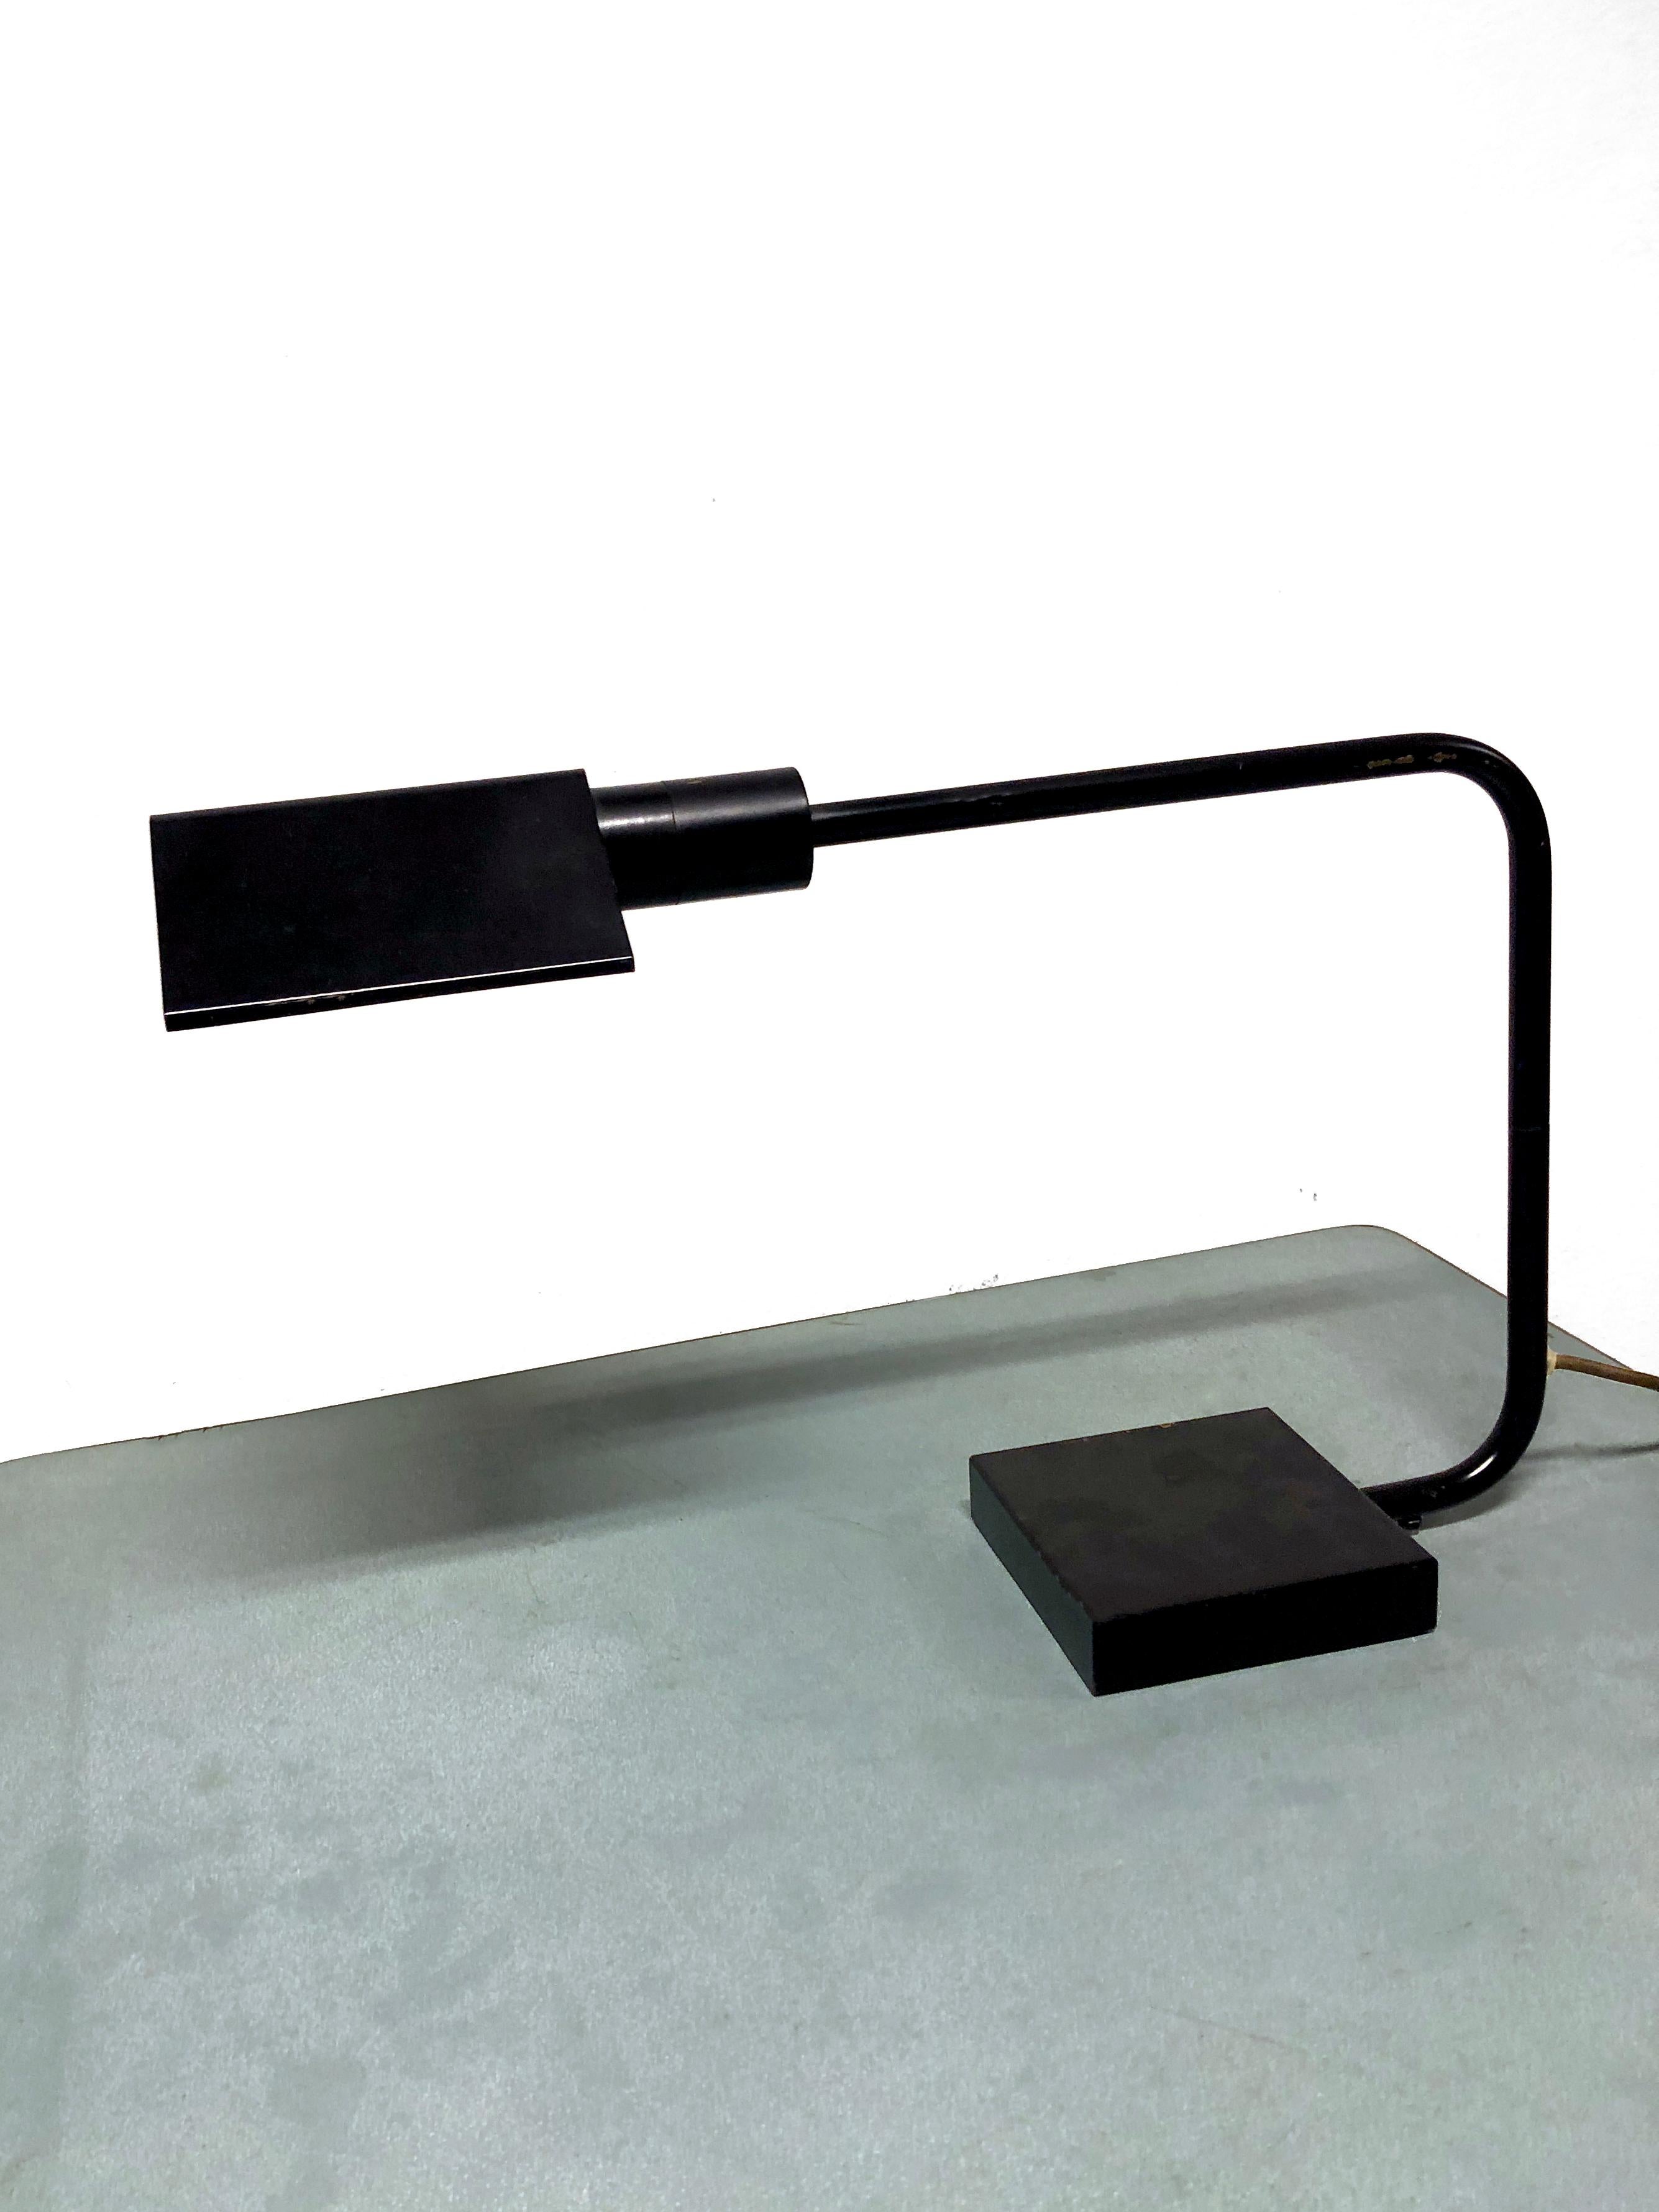 American Table Lamp Attributed to Koch & Lowy, 1970s For Sale